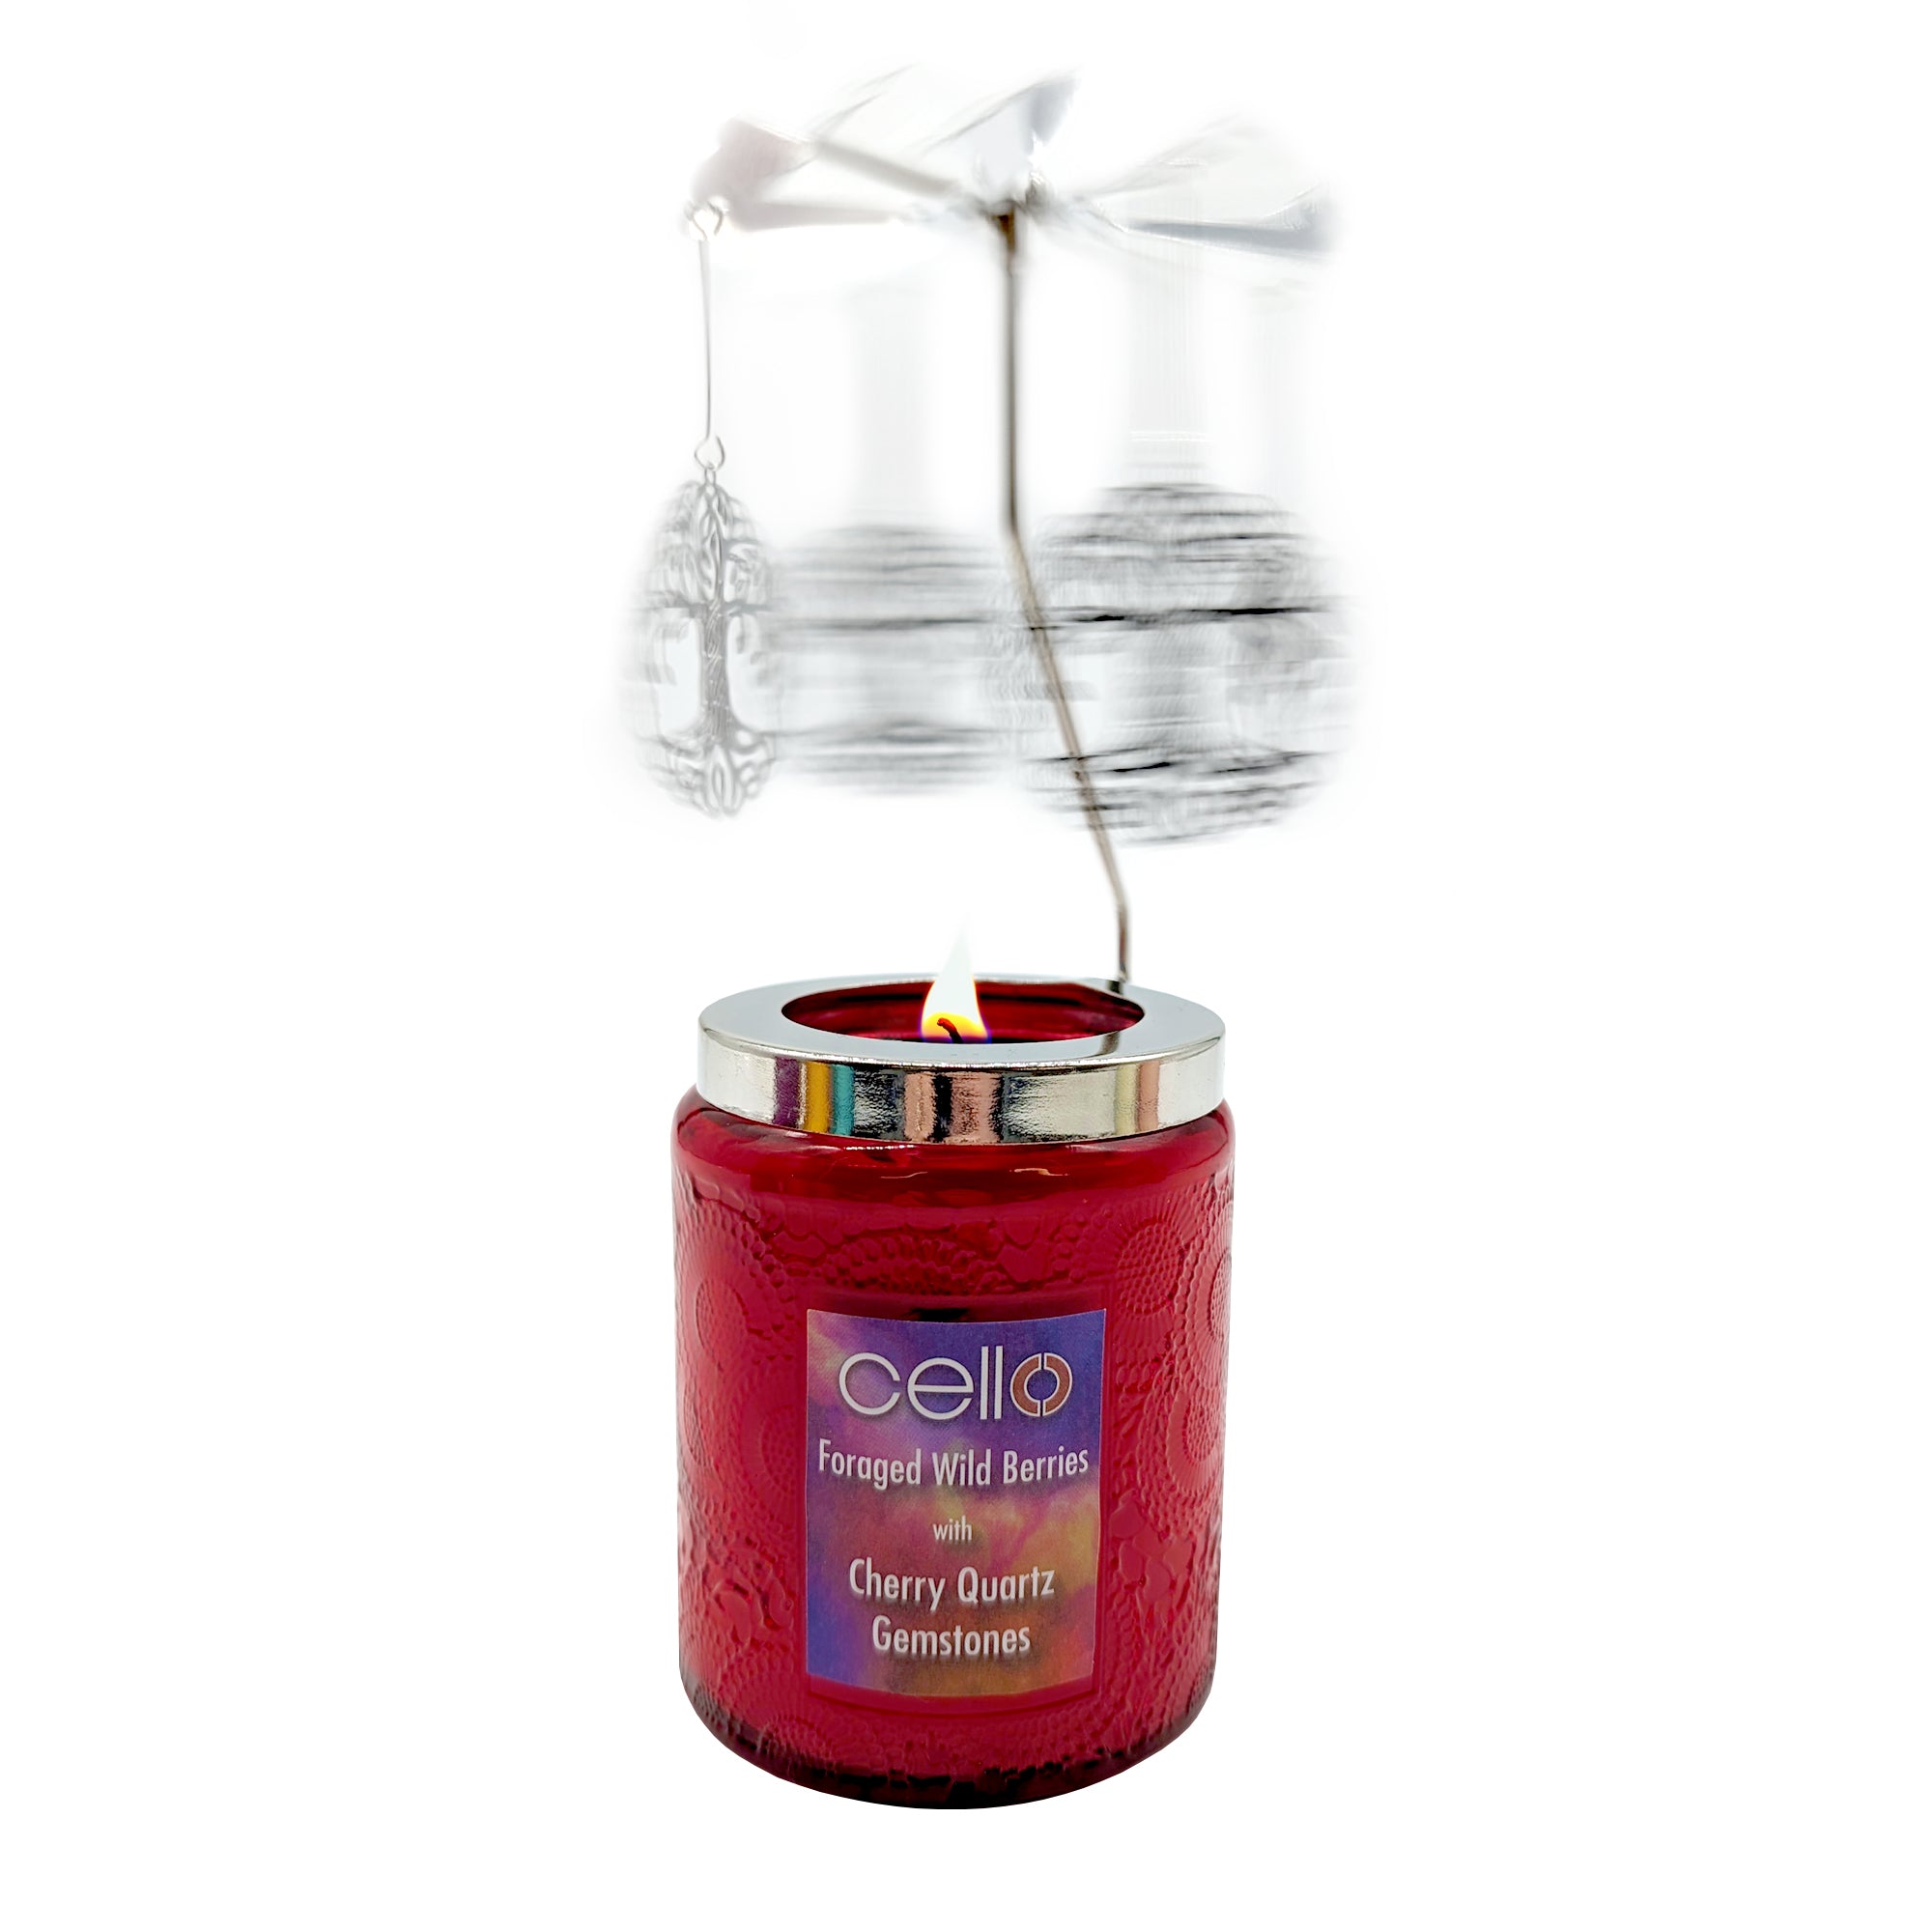 Cello - Gemstone Candle 200g with Convection Spinner - Foraged Wild Berries with Cherry Quartz